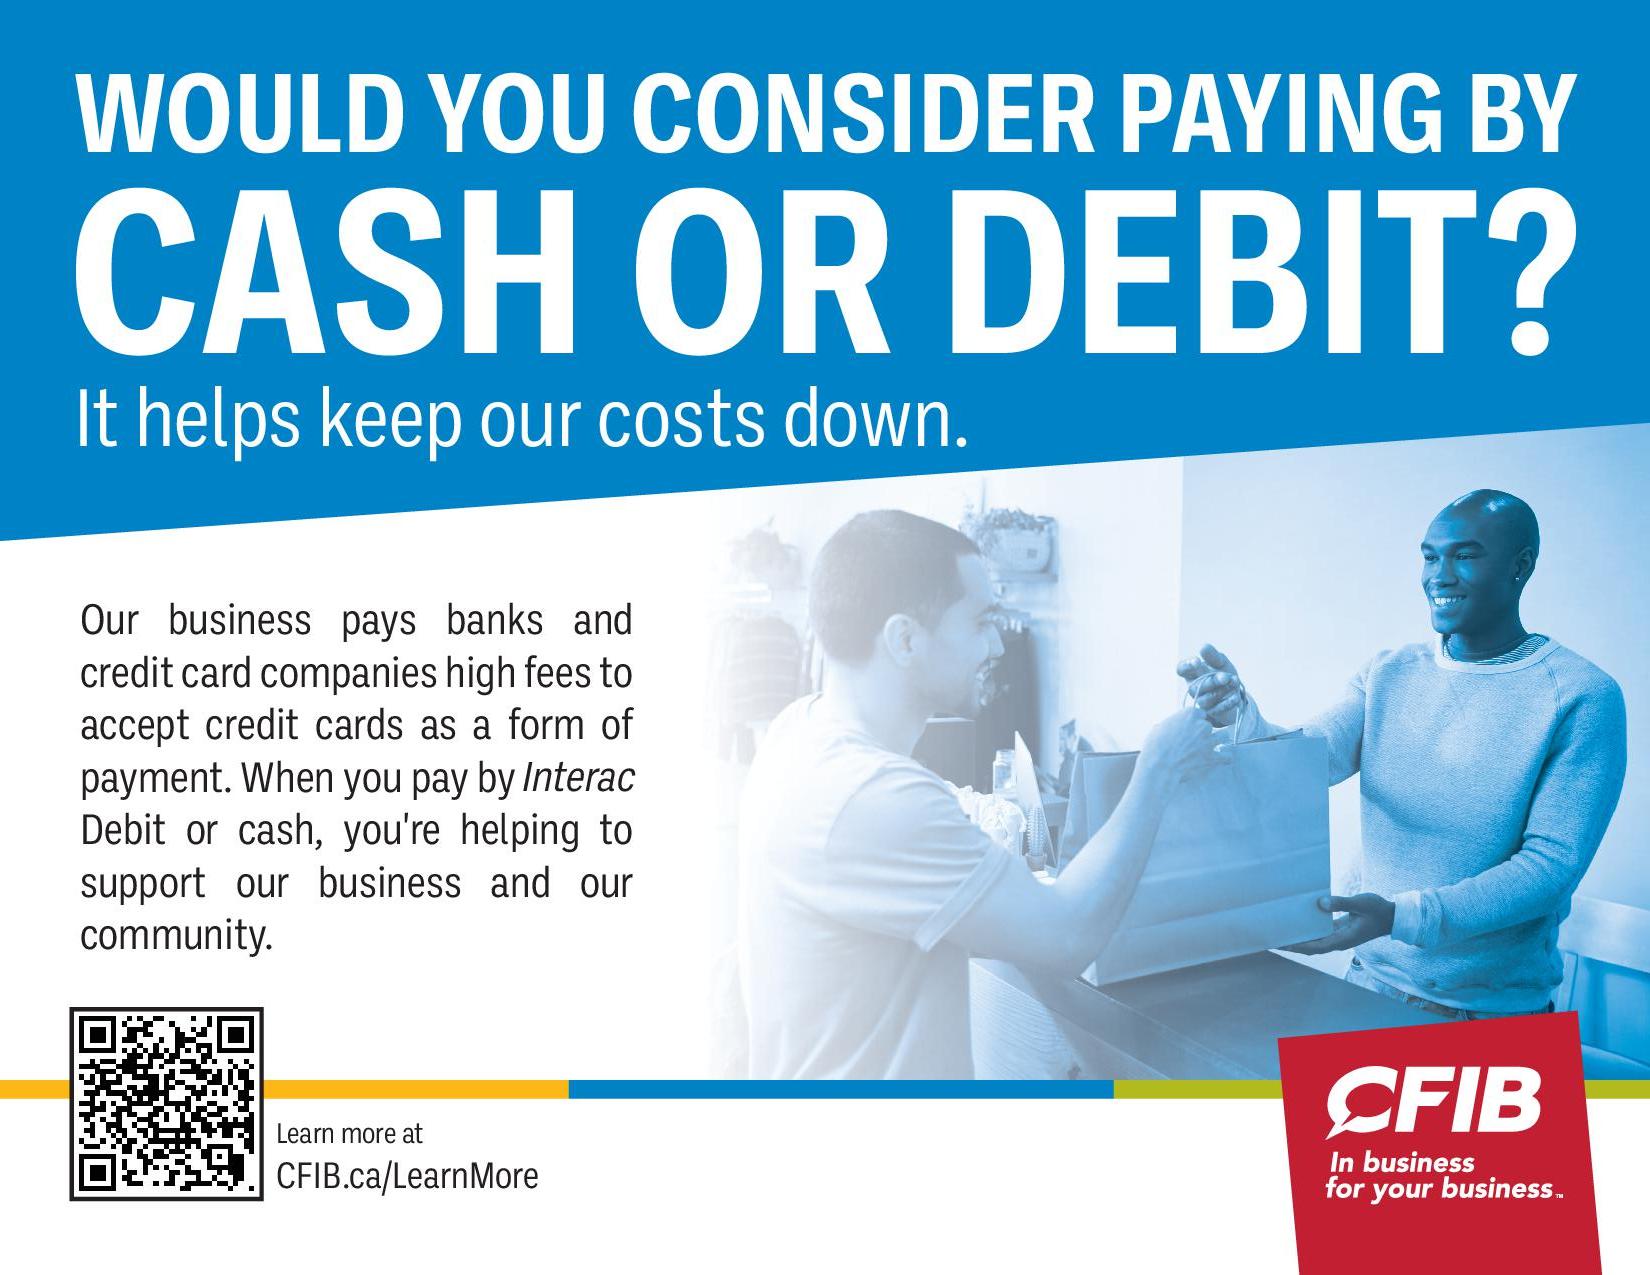 Consider Paying by Cash or Debit Poster